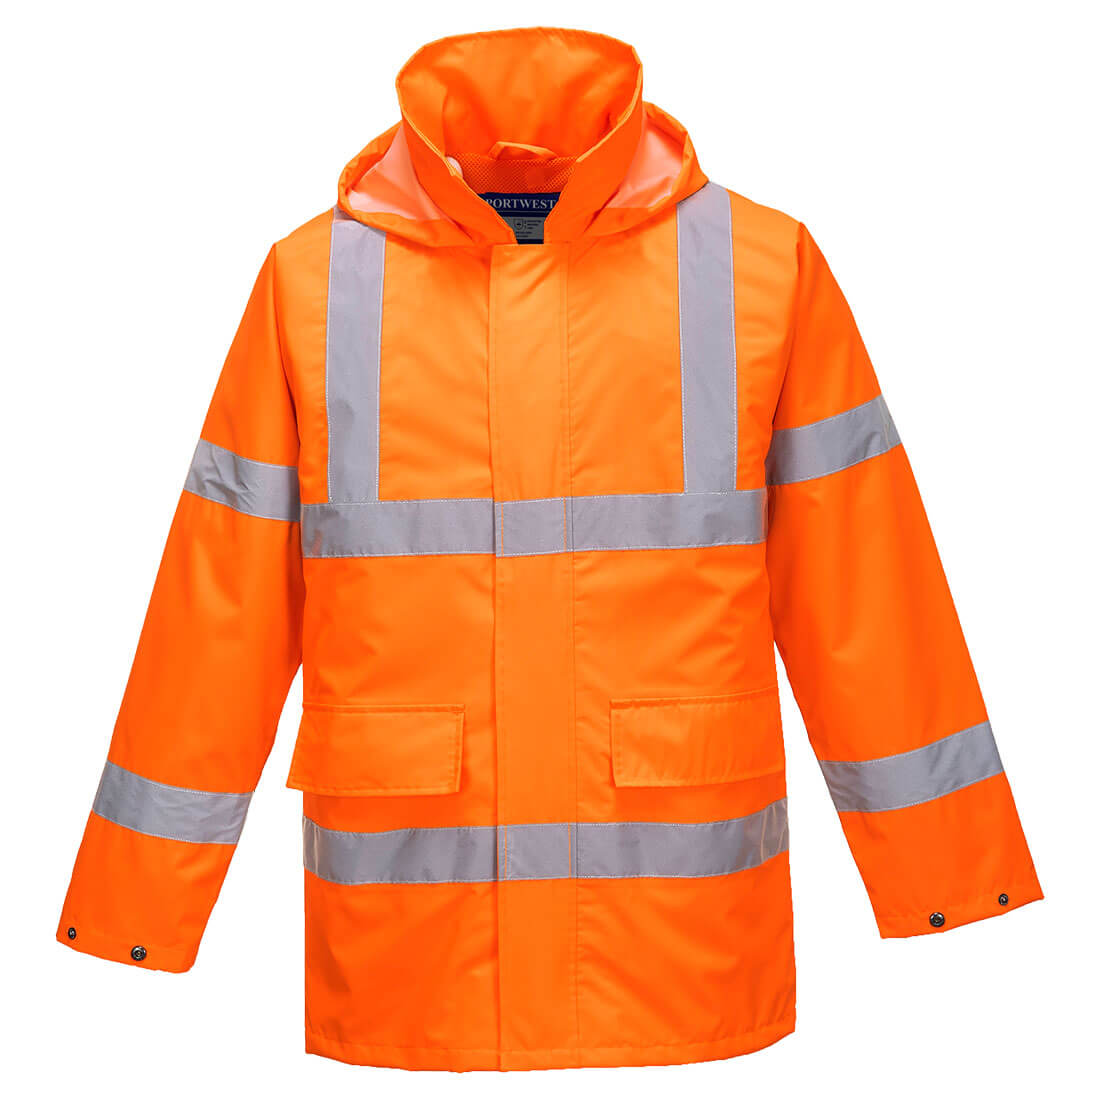 High Visibility, Work Jackets